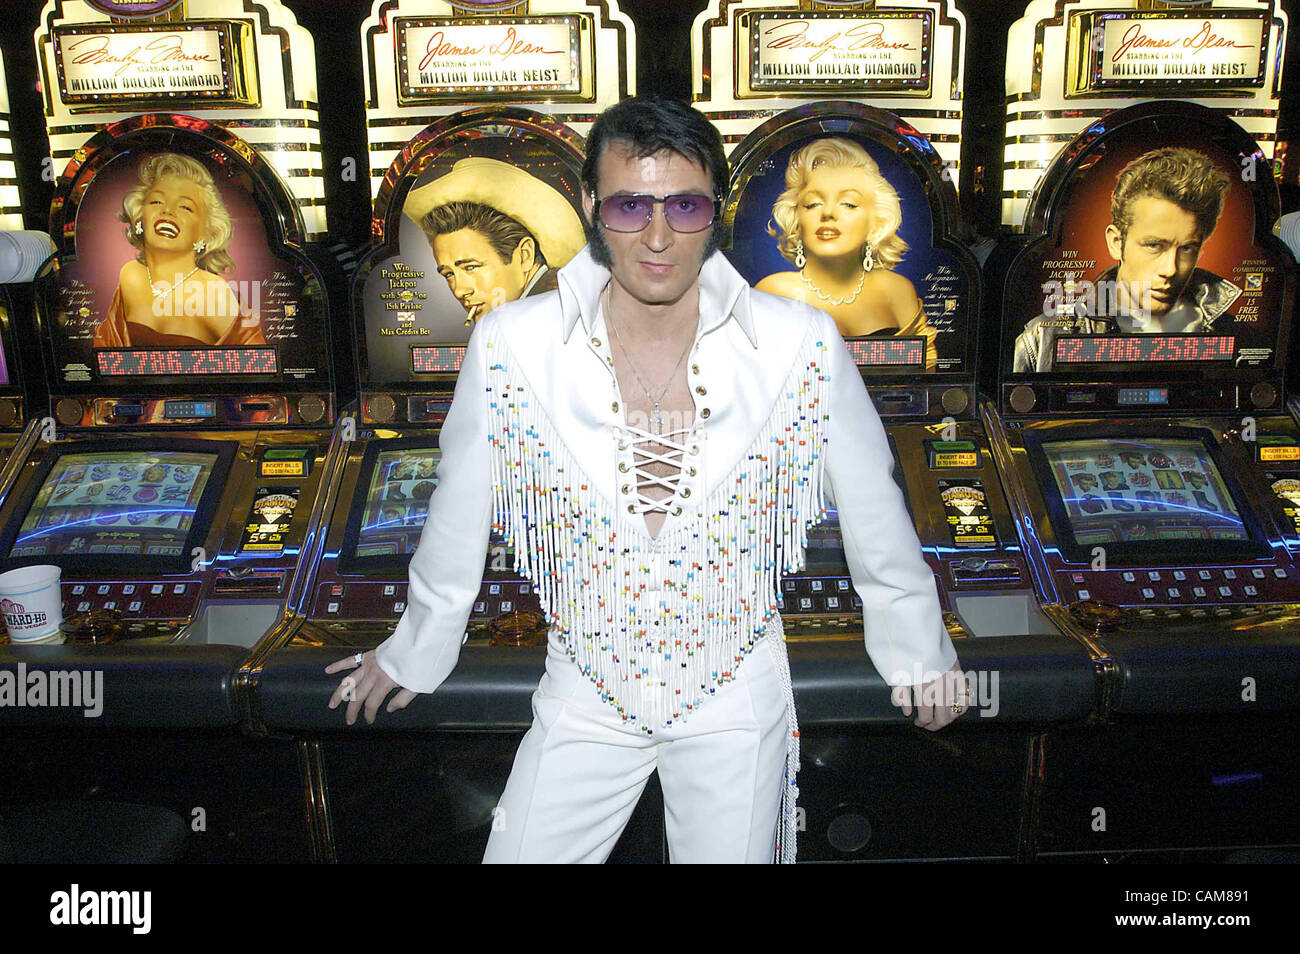 Jan. 11, 2004 - Las Vegas, USA - Switzerland's Francis Doerr poses in front of slot machines depicting two of the other American icons of the 50's before performing at the Elvis Impersonator National Finals at the Westward Ho Hotel and Casino in Las Vegas.  Competing against 40 other tribute artists Stock Photo